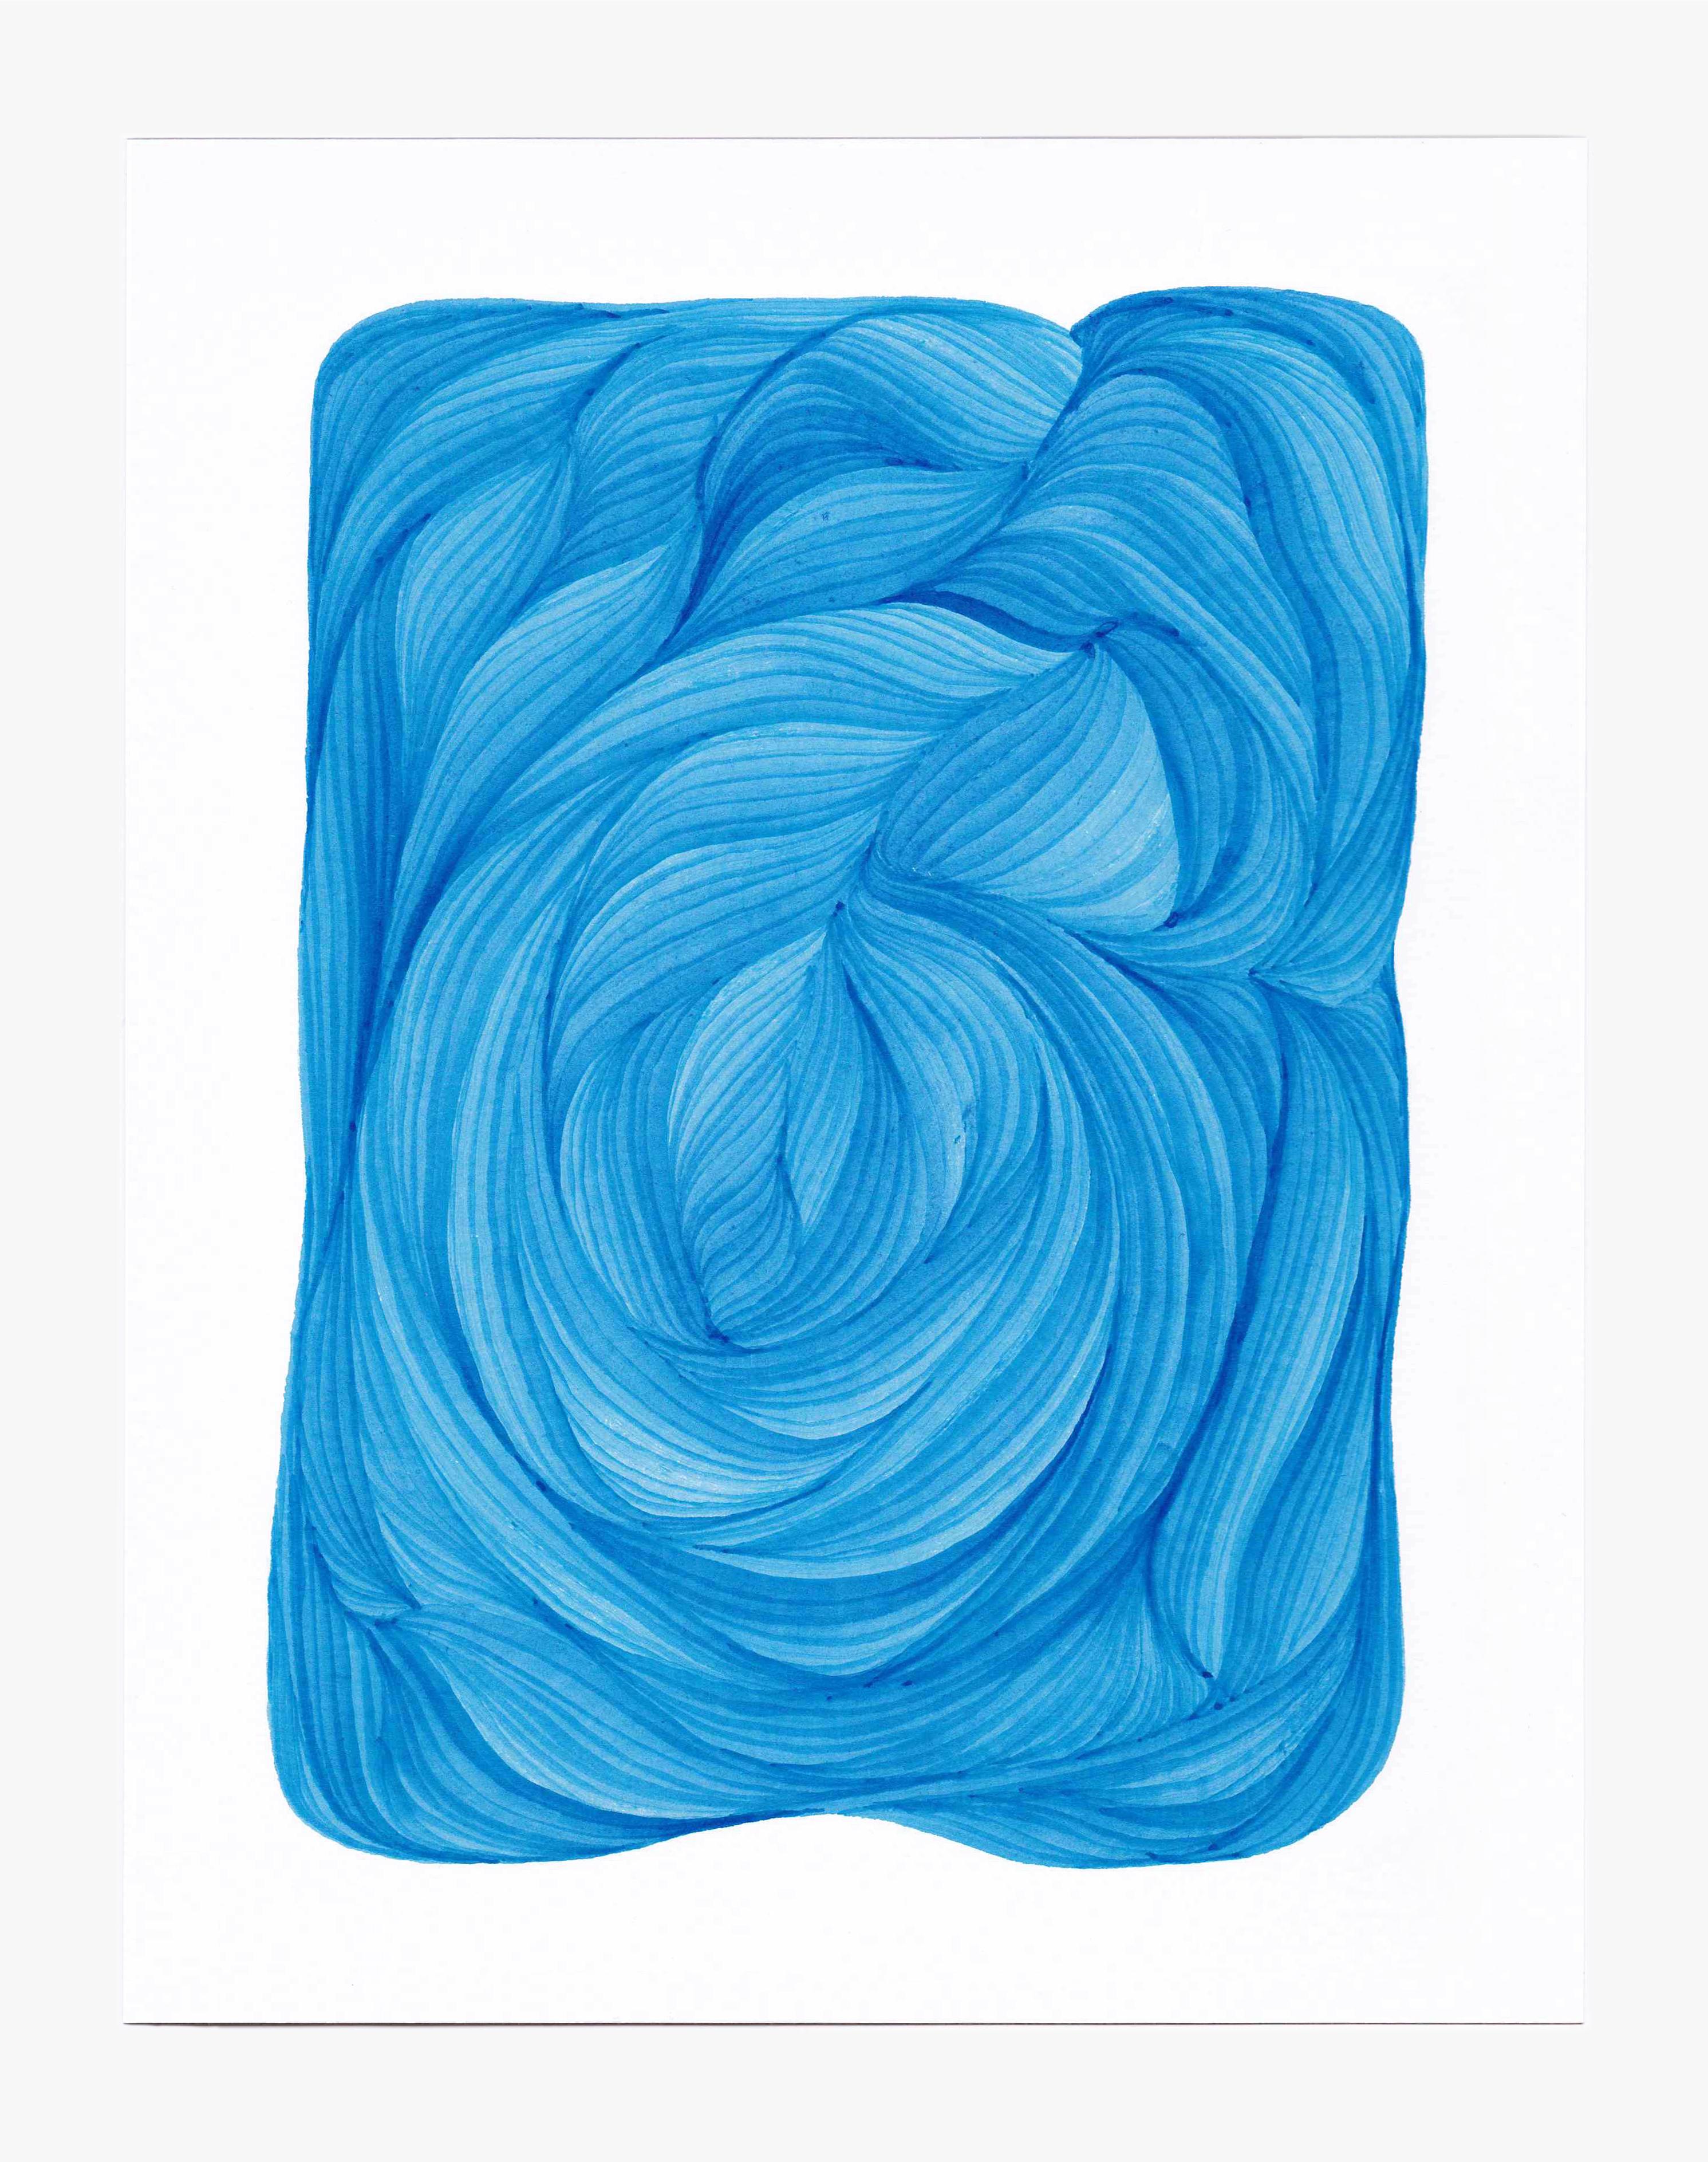 Dana Piazza Abstract Drawing - Lines 4 - abstract geometric bright blue ink drawing on paper